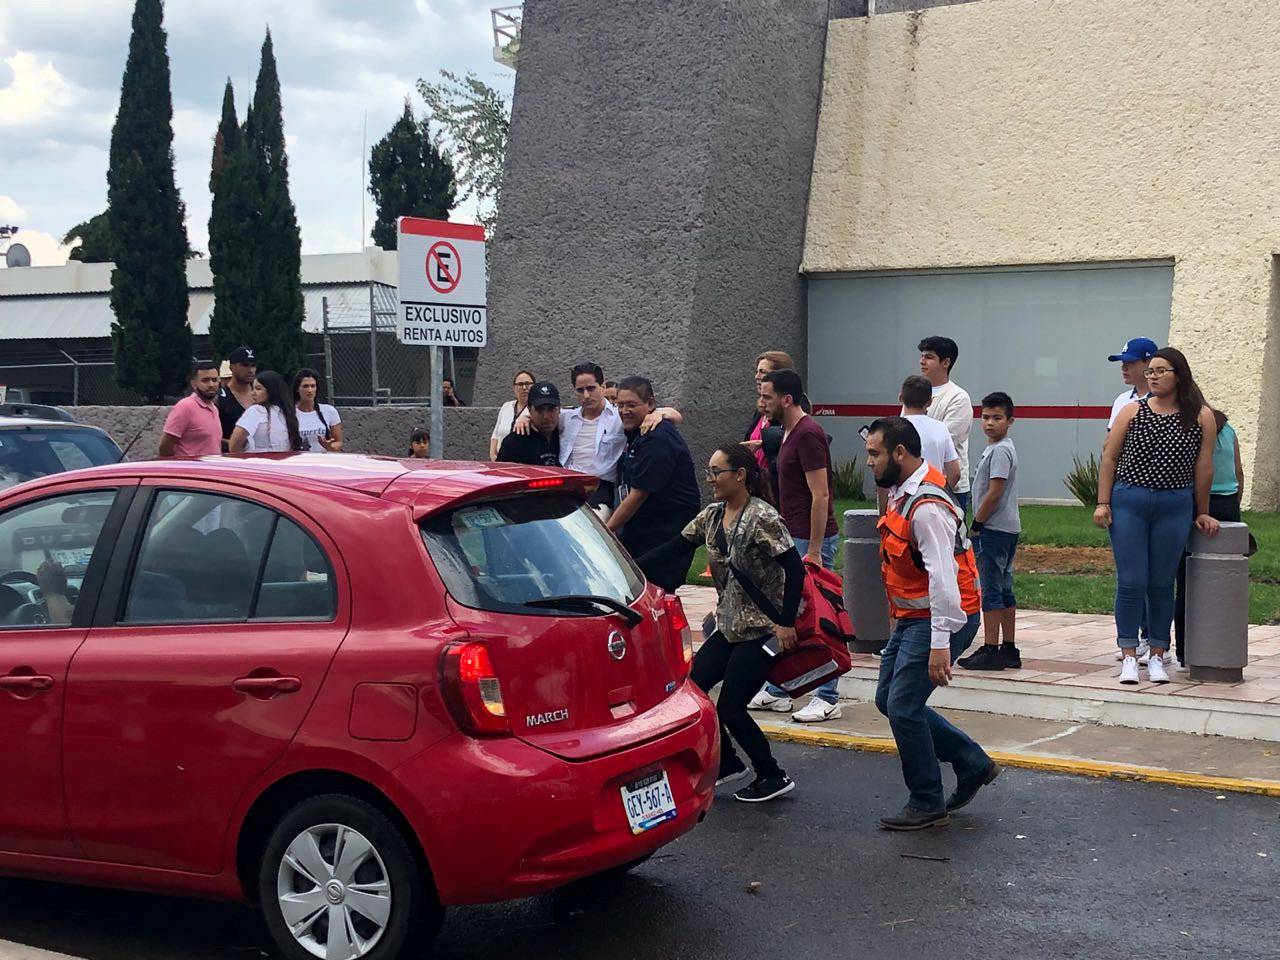 A man is helped into a car outside the Durango Airport after an Aeromexico-operated Embraer passenger jet crashed right after takeoff in Mexico's state of Durango